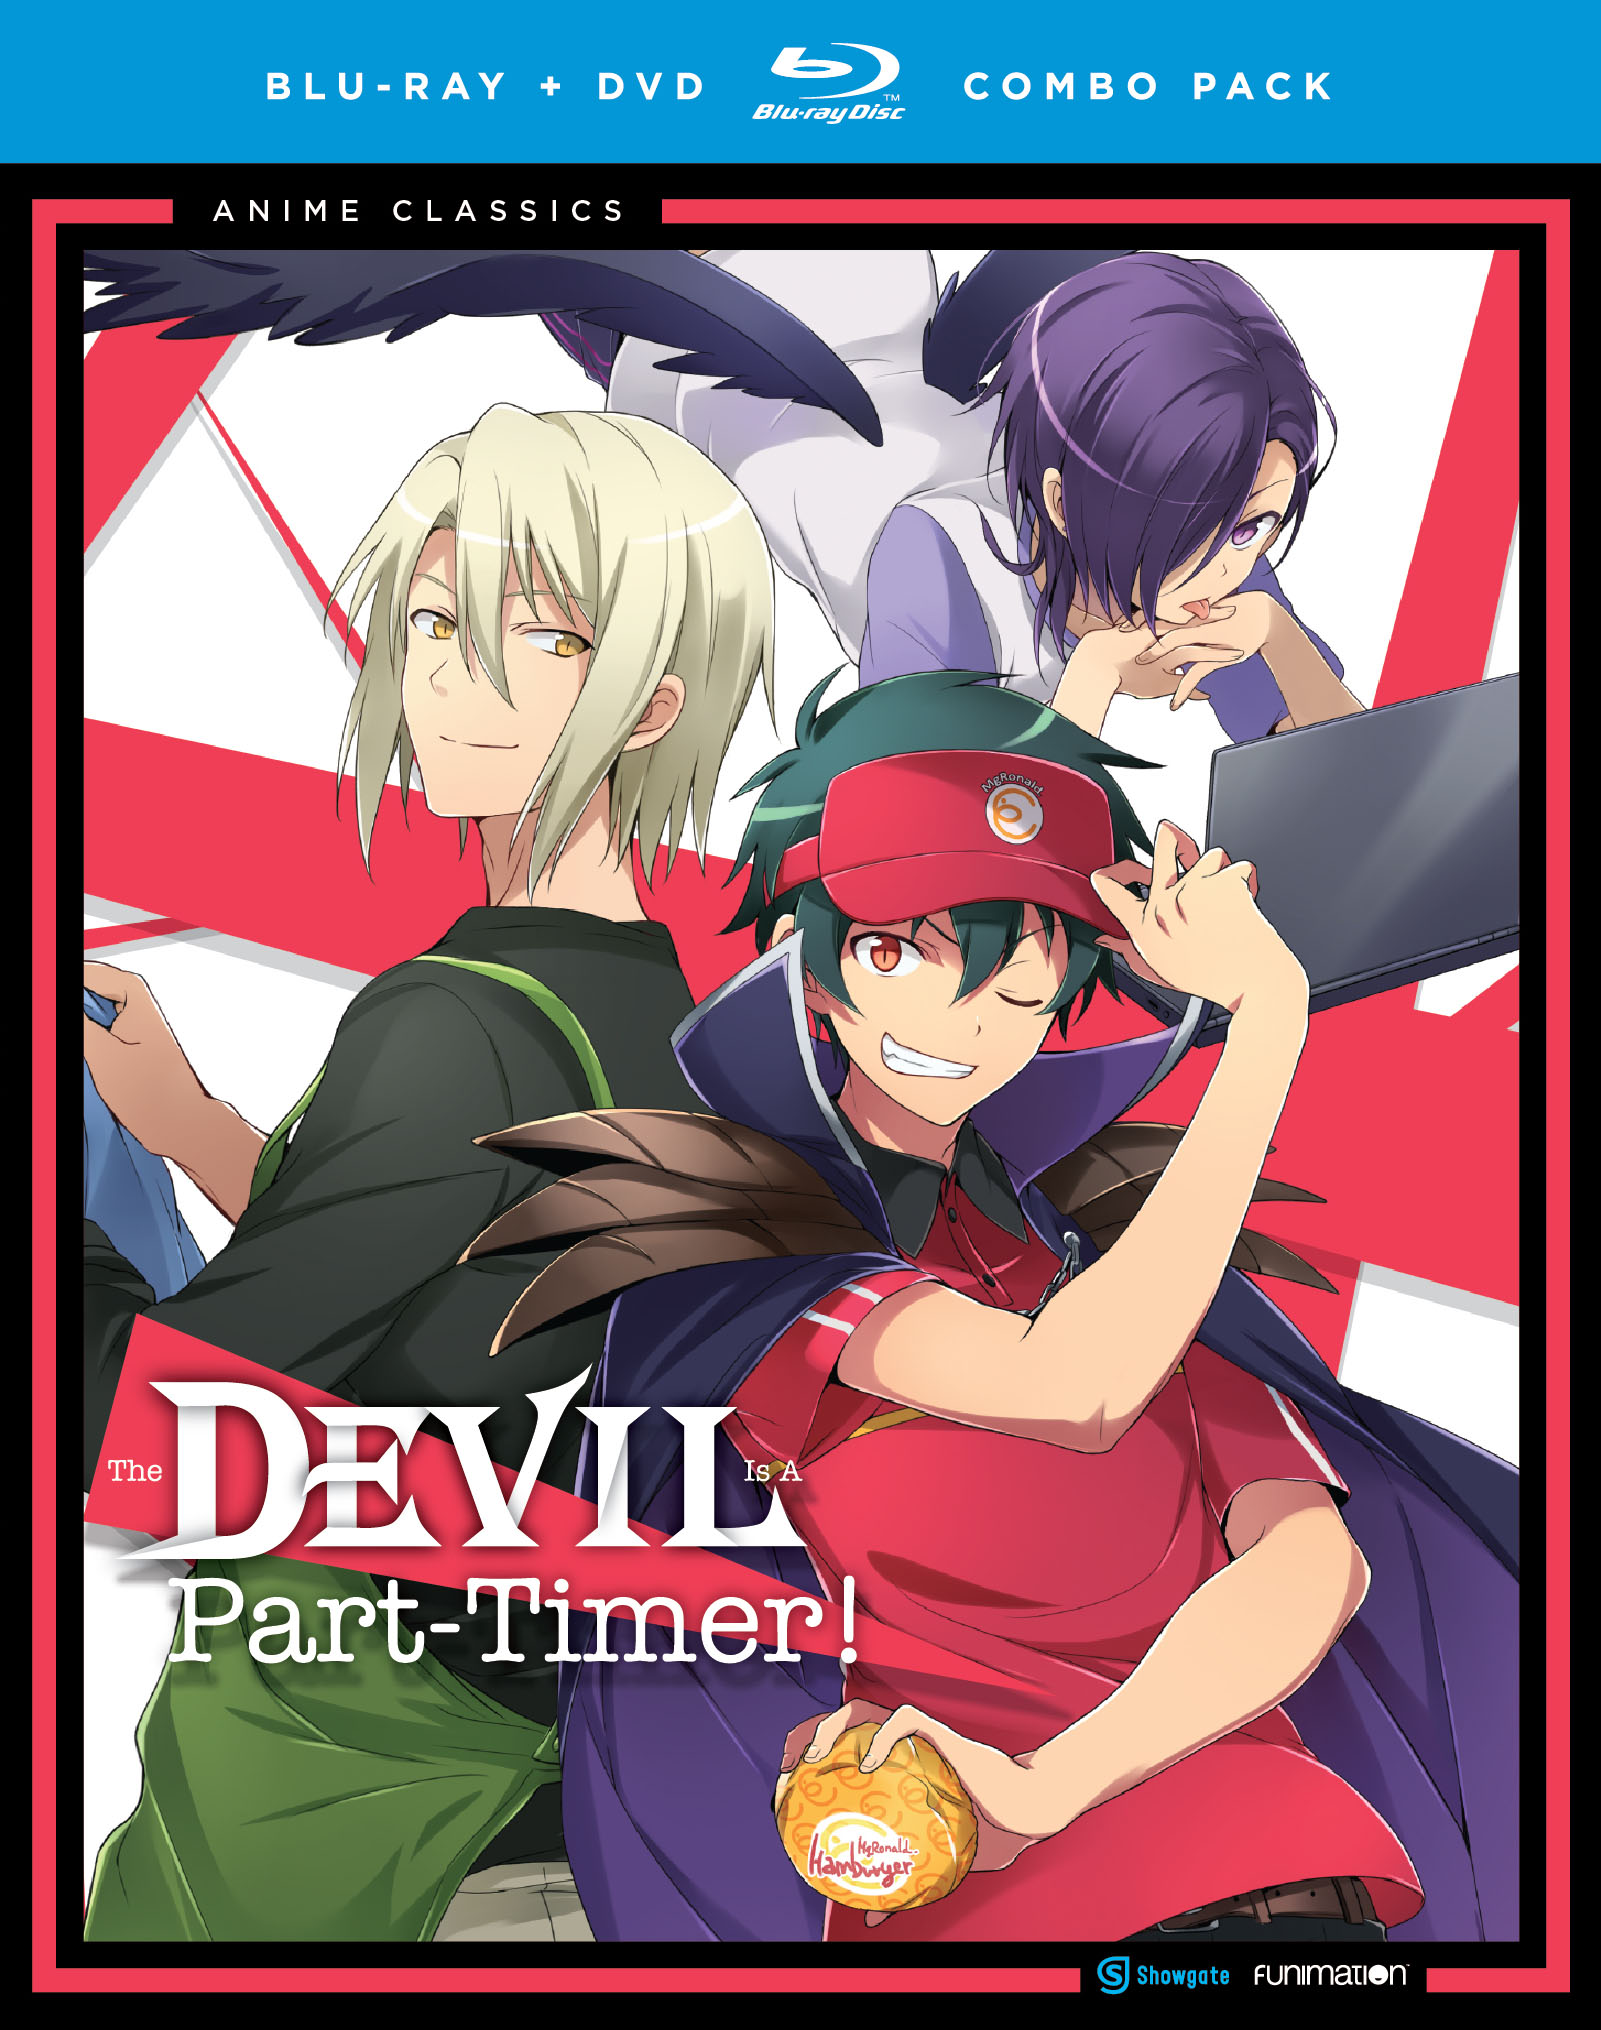 TV Time - The Devil Is a Part-Timer! (TVShow Time)